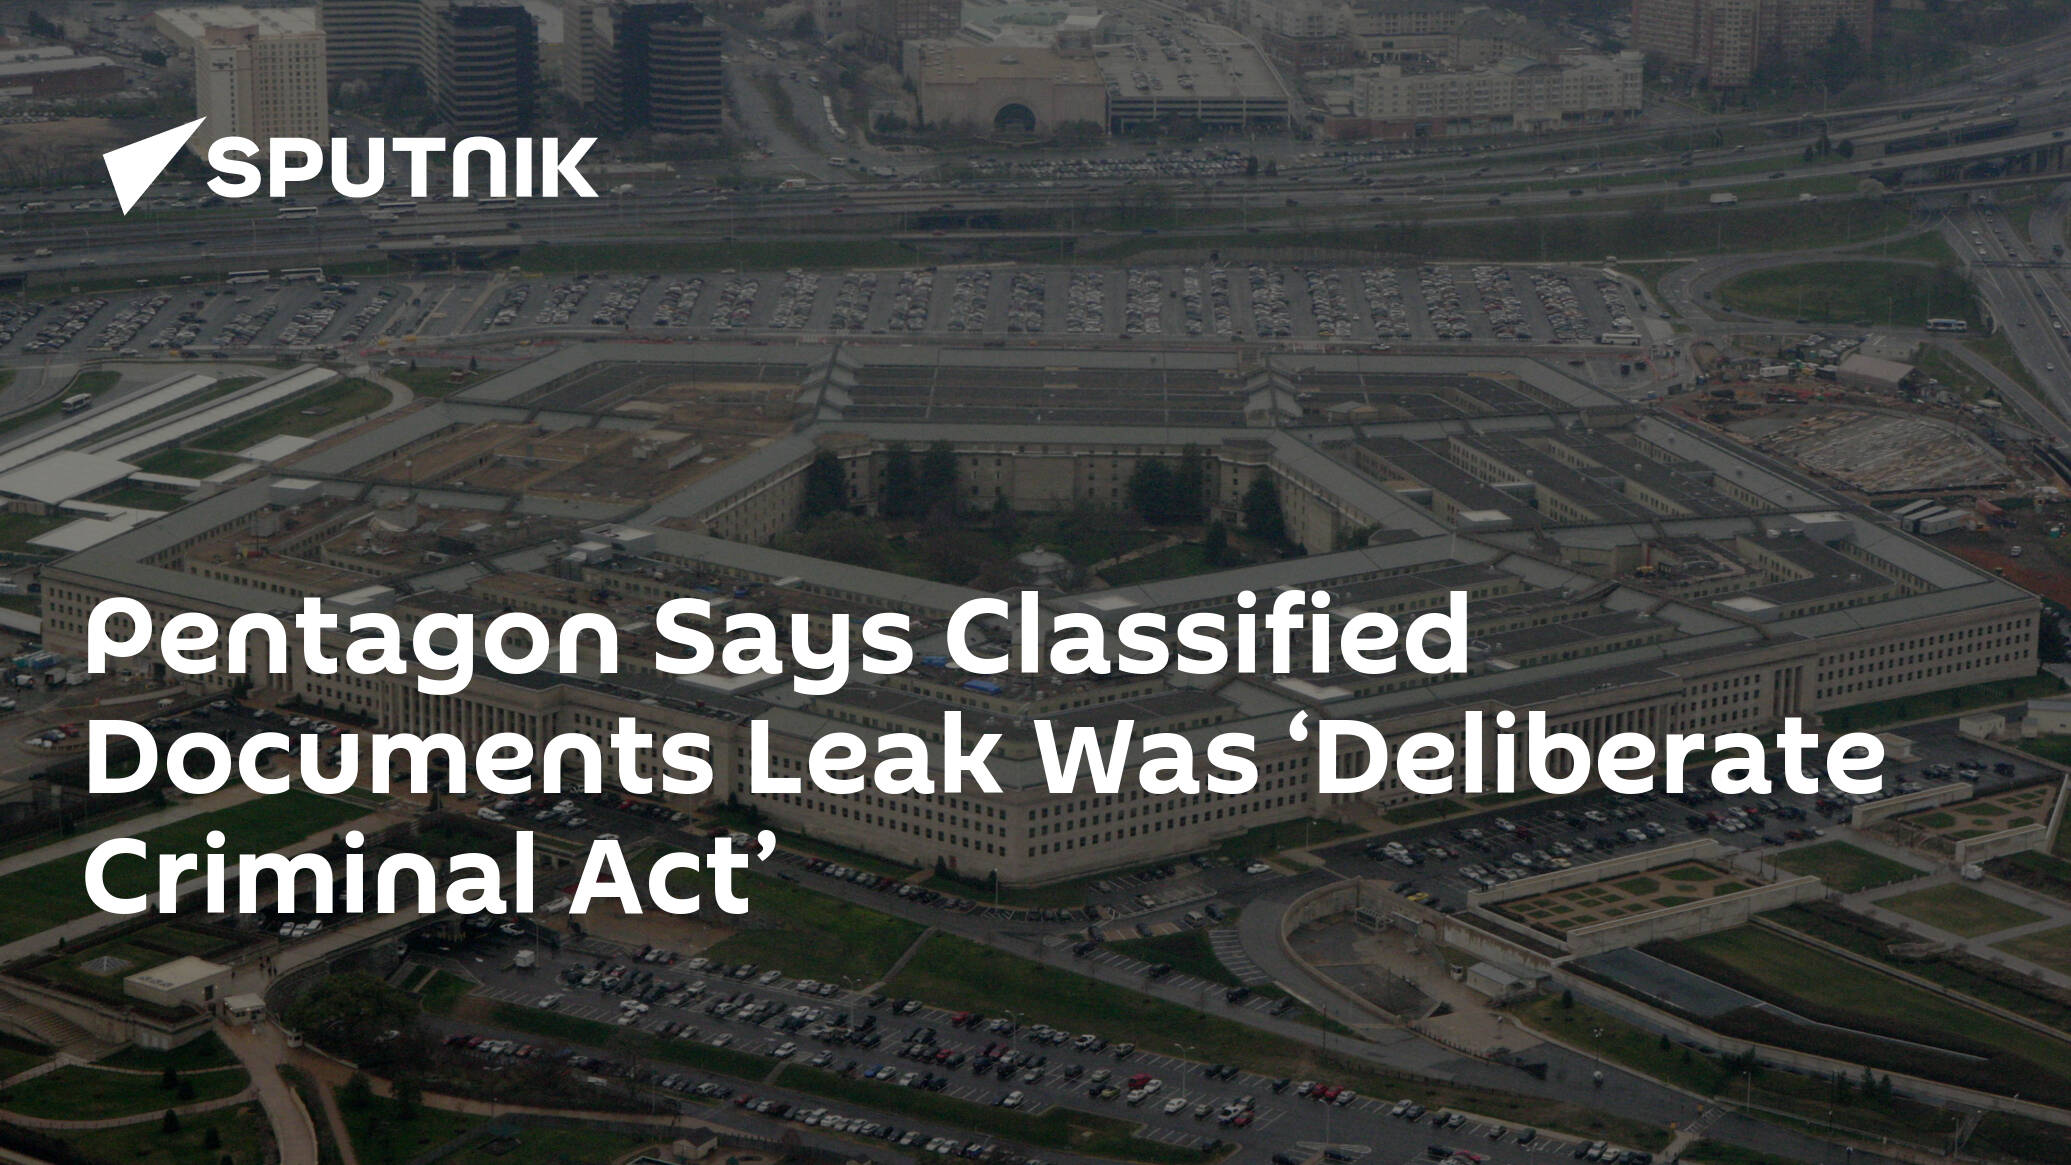 Pentagon Says Classified Documents Leak Was ‘Deliberate Criminal Act’